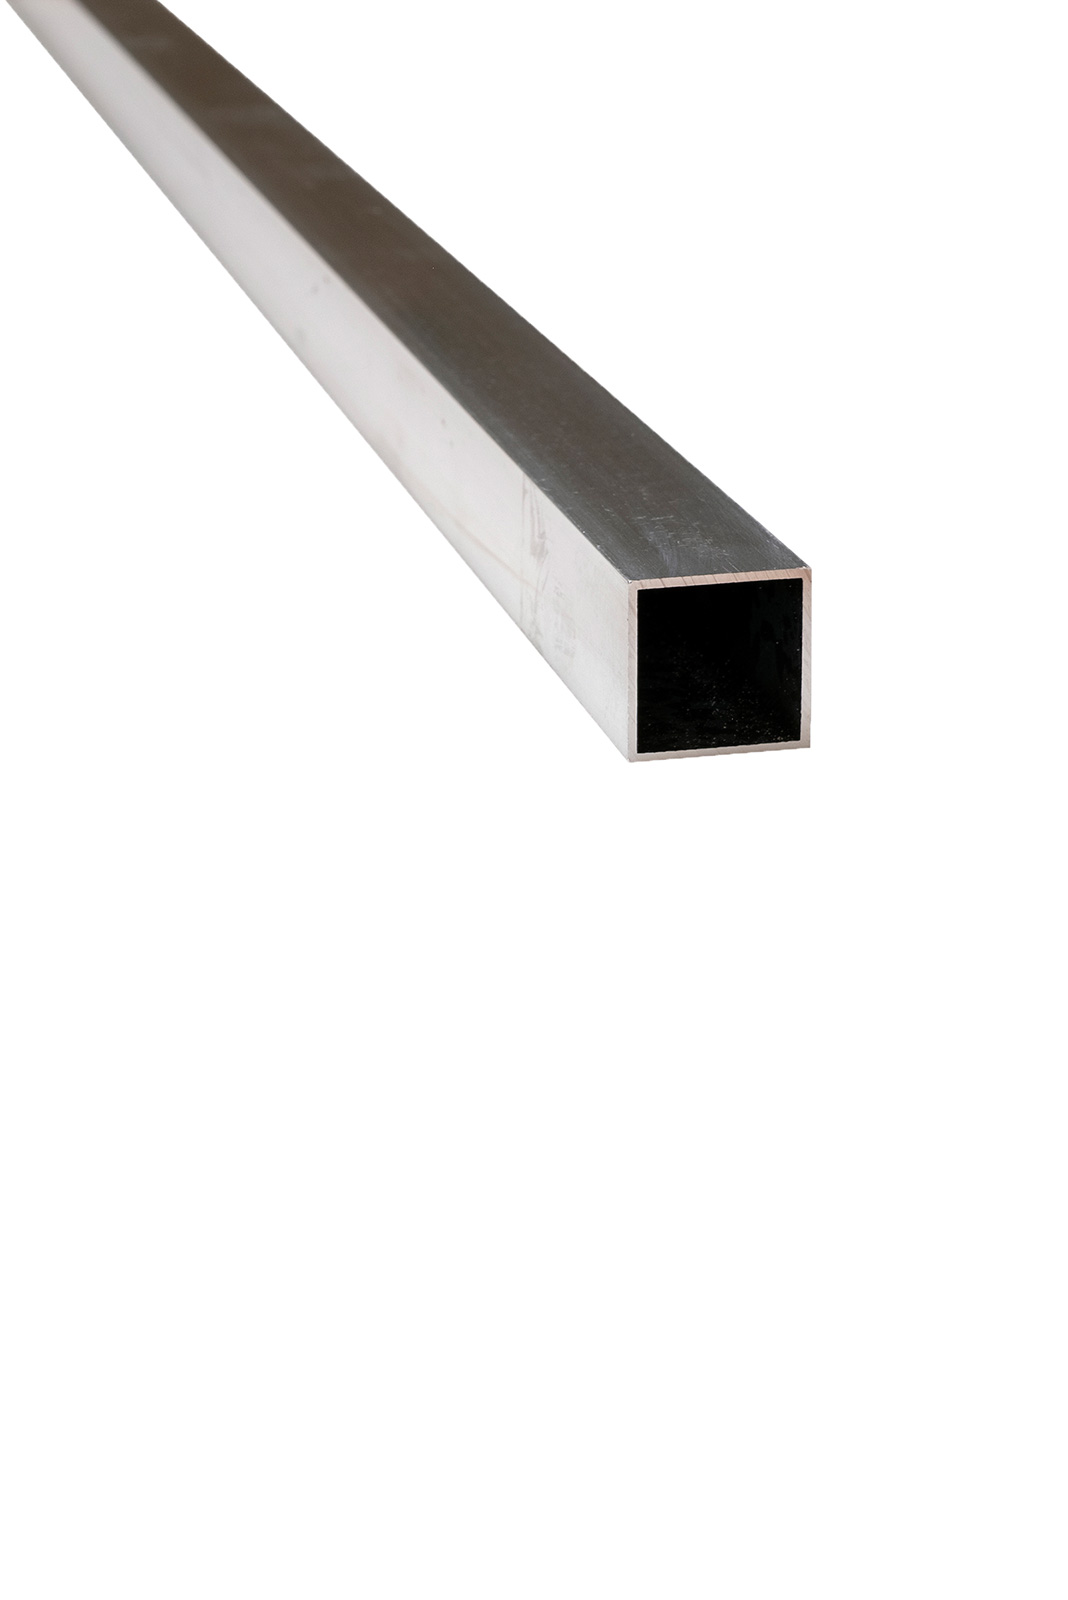 Buy Aluminium & Steel (Tube,Plate,Bar) products Online